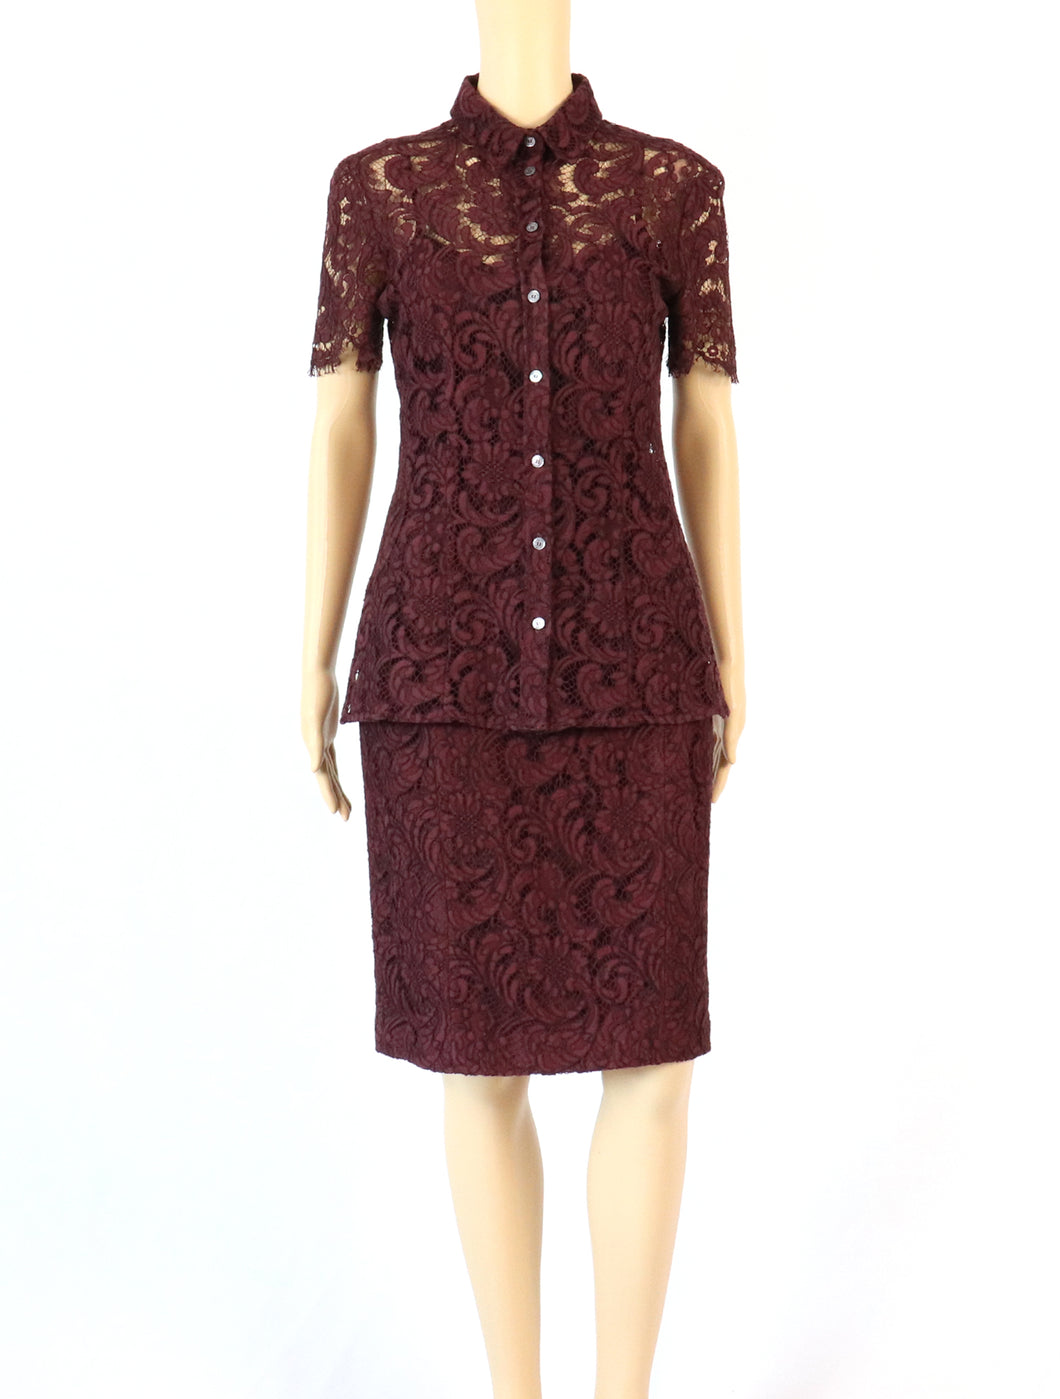 Burberry Lace Pencil Skirt and Button Down Top Set